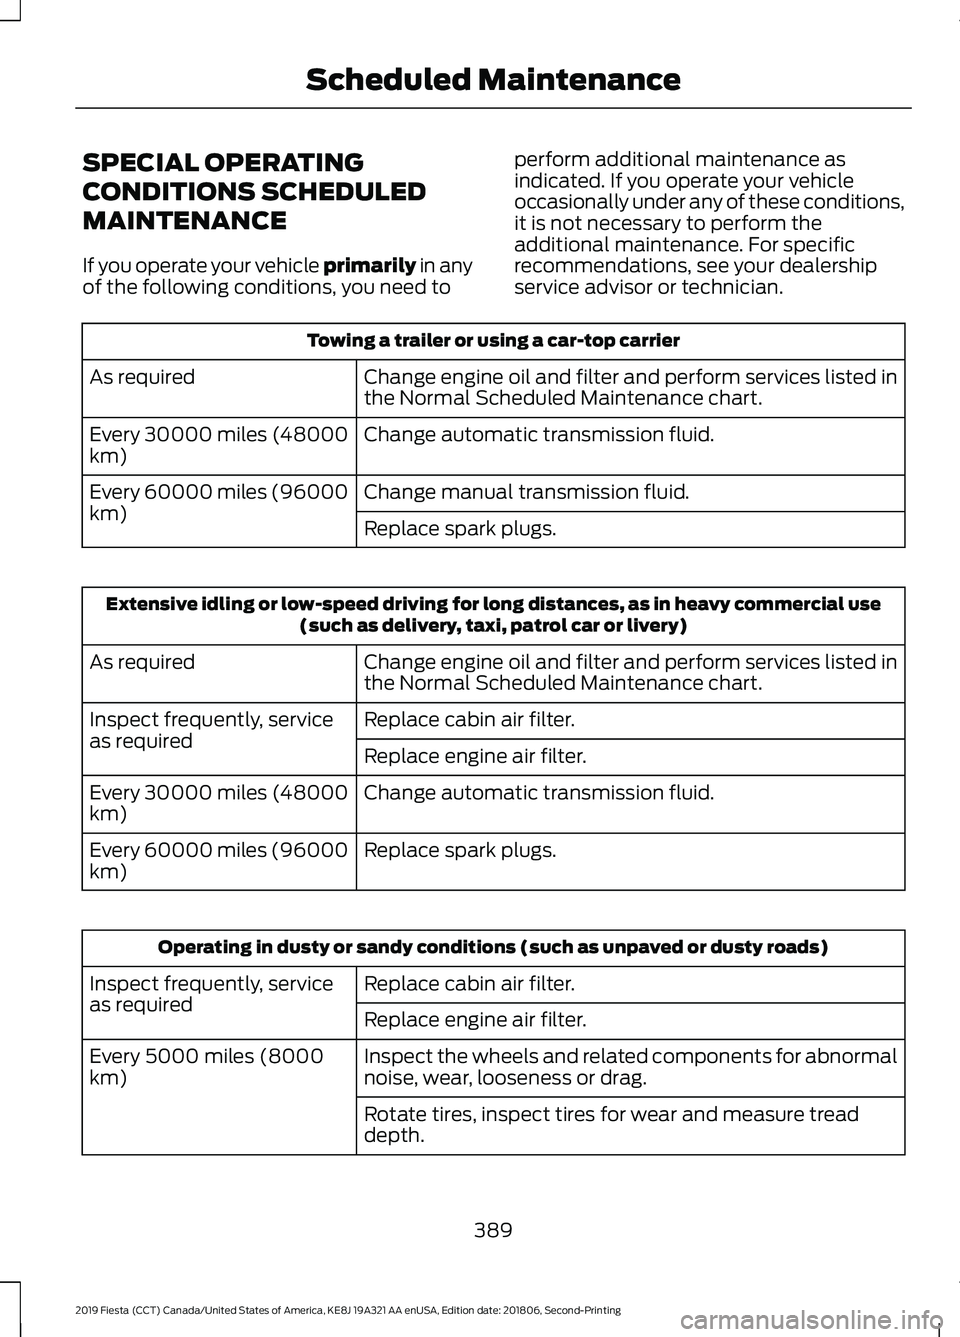 FORD FIESTA 2019  Owners Manual SPECIAL OPERATING
CONDITIONS SCHEDULED
MAINTENANCE
If you operate your vehicle primarily in any
of the following conditions, you need to perform additional maintenance as
indicated. If you operate you